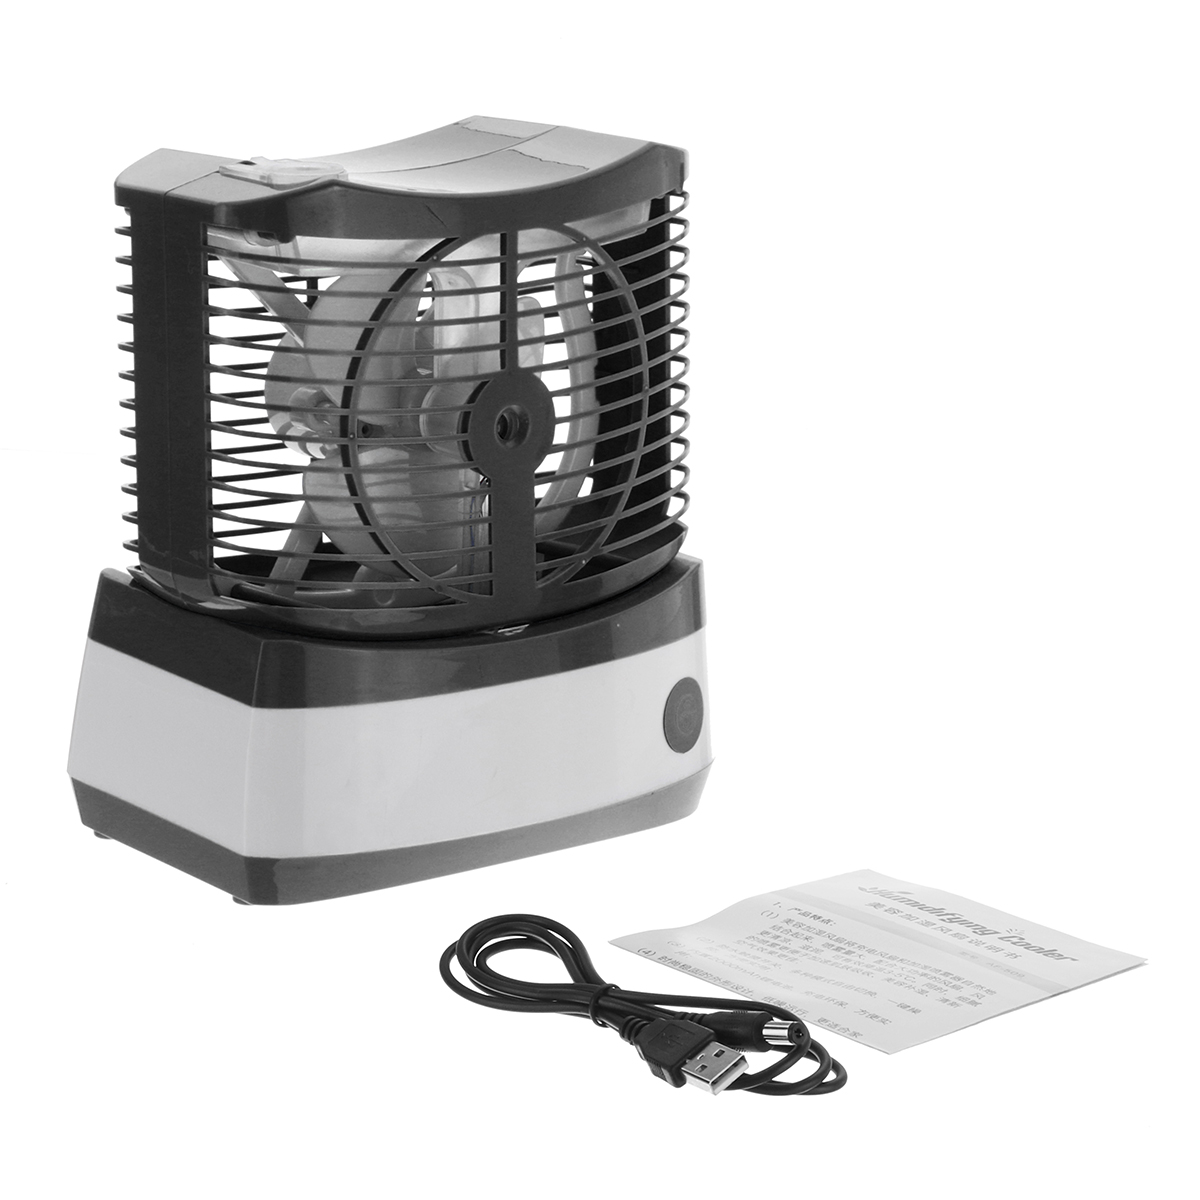 USB-Portable-Mini-ABS-Fan-Cooling-Desktop-Air-Conditioner-Fan-Humidified-Foggy-1419352-6